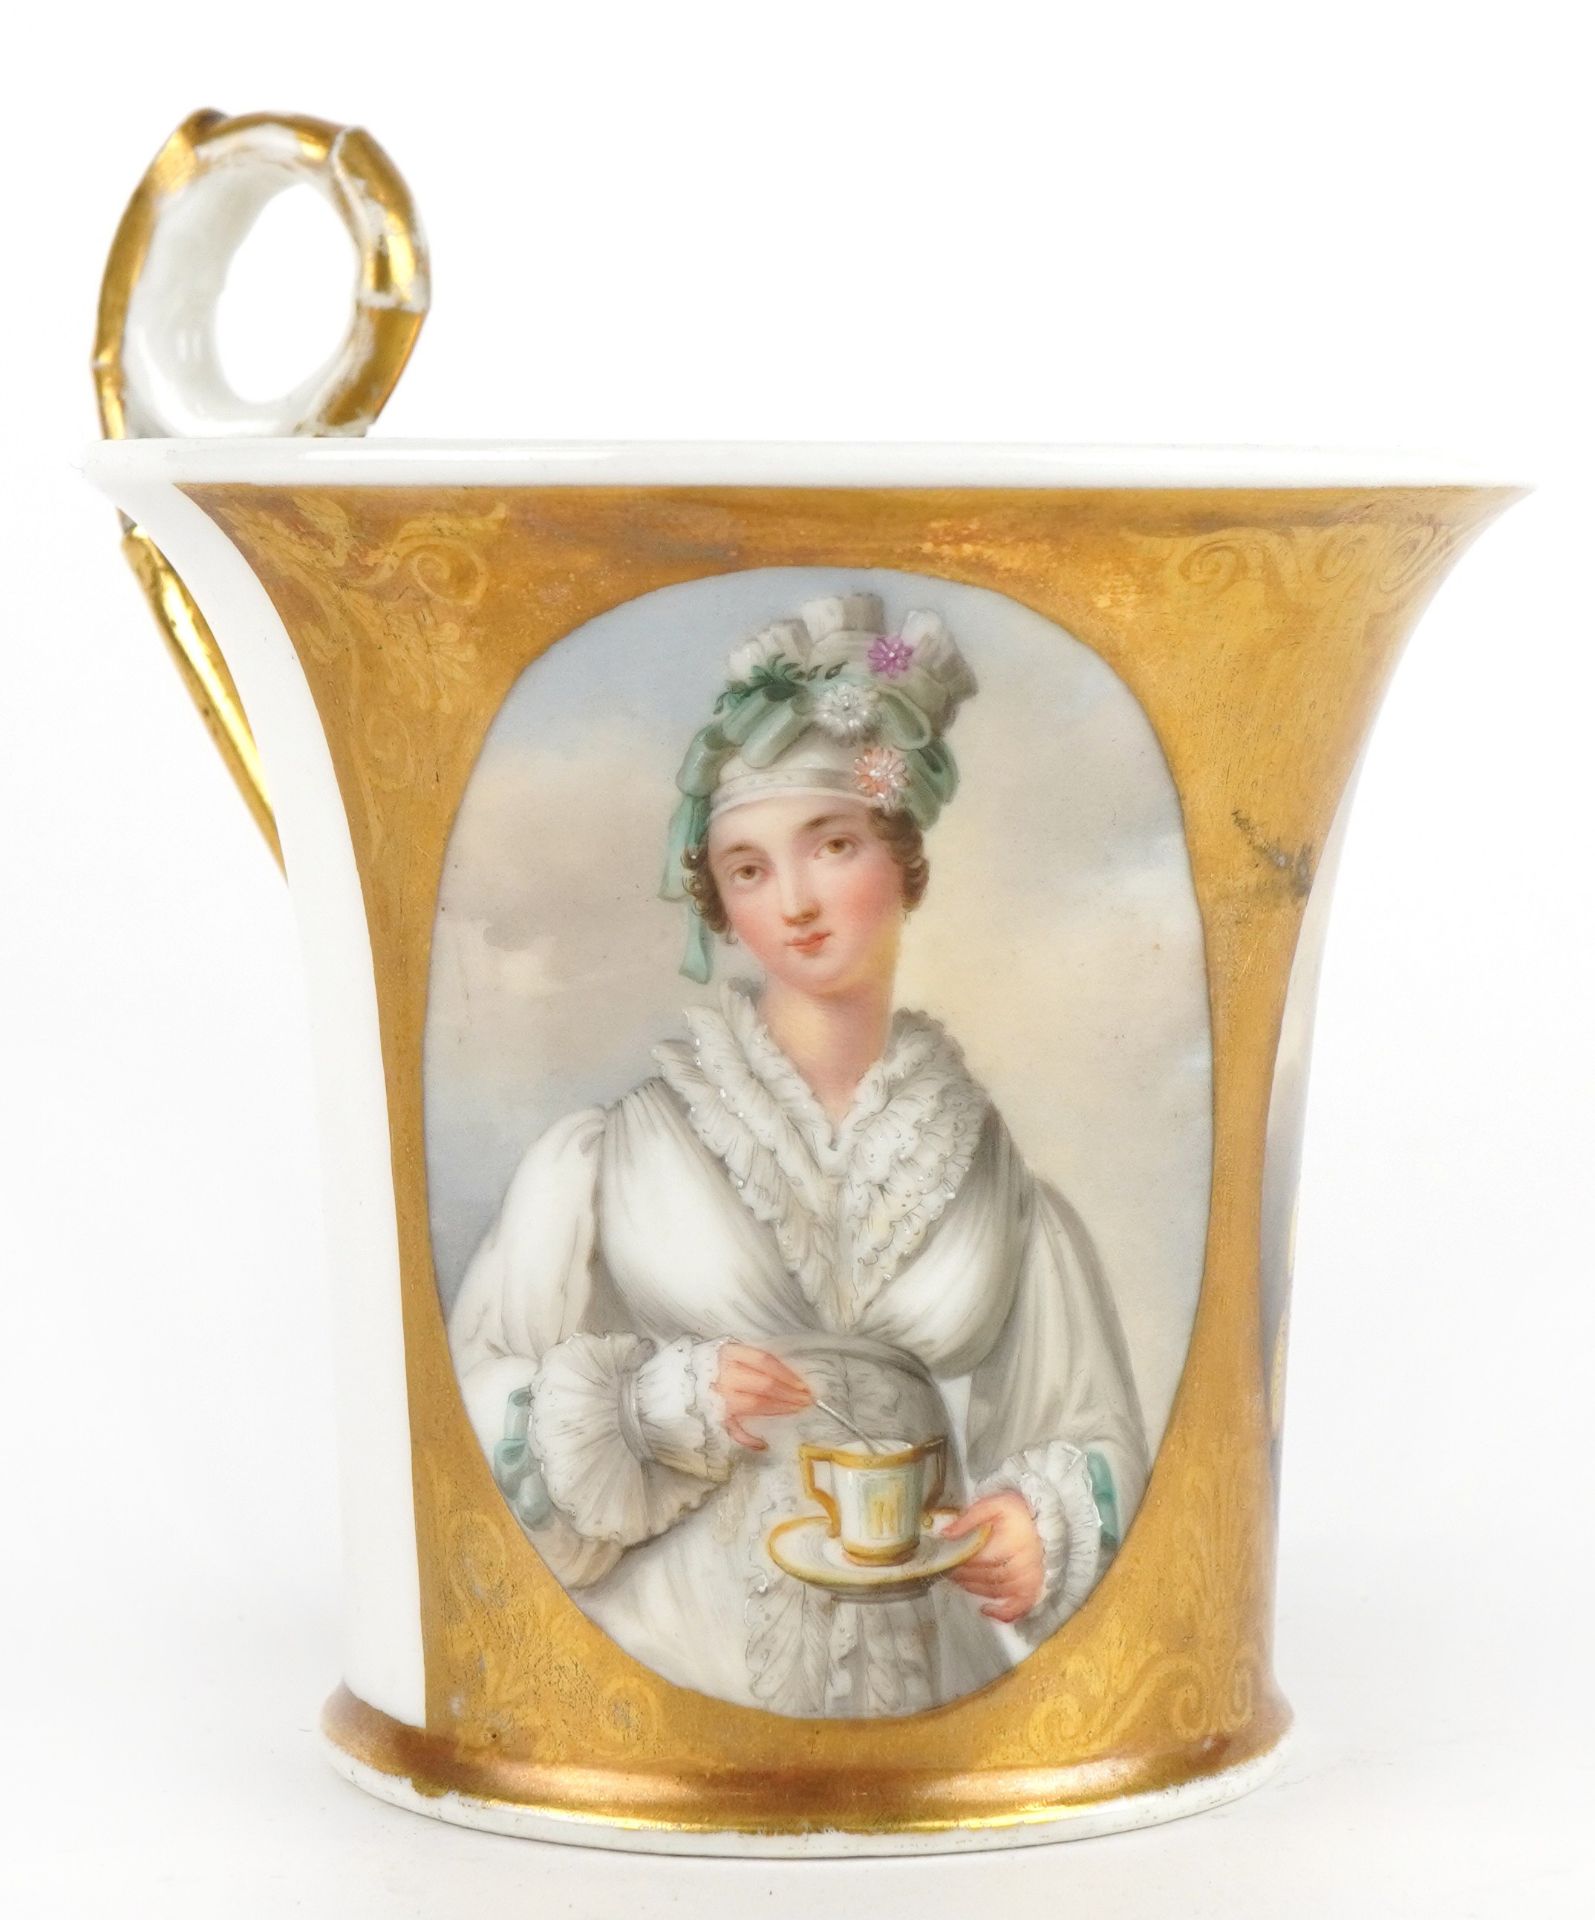 Early 19th century European porcelain cup hand painted with oval portraits of young Queen Victoria - Image 2 of 5